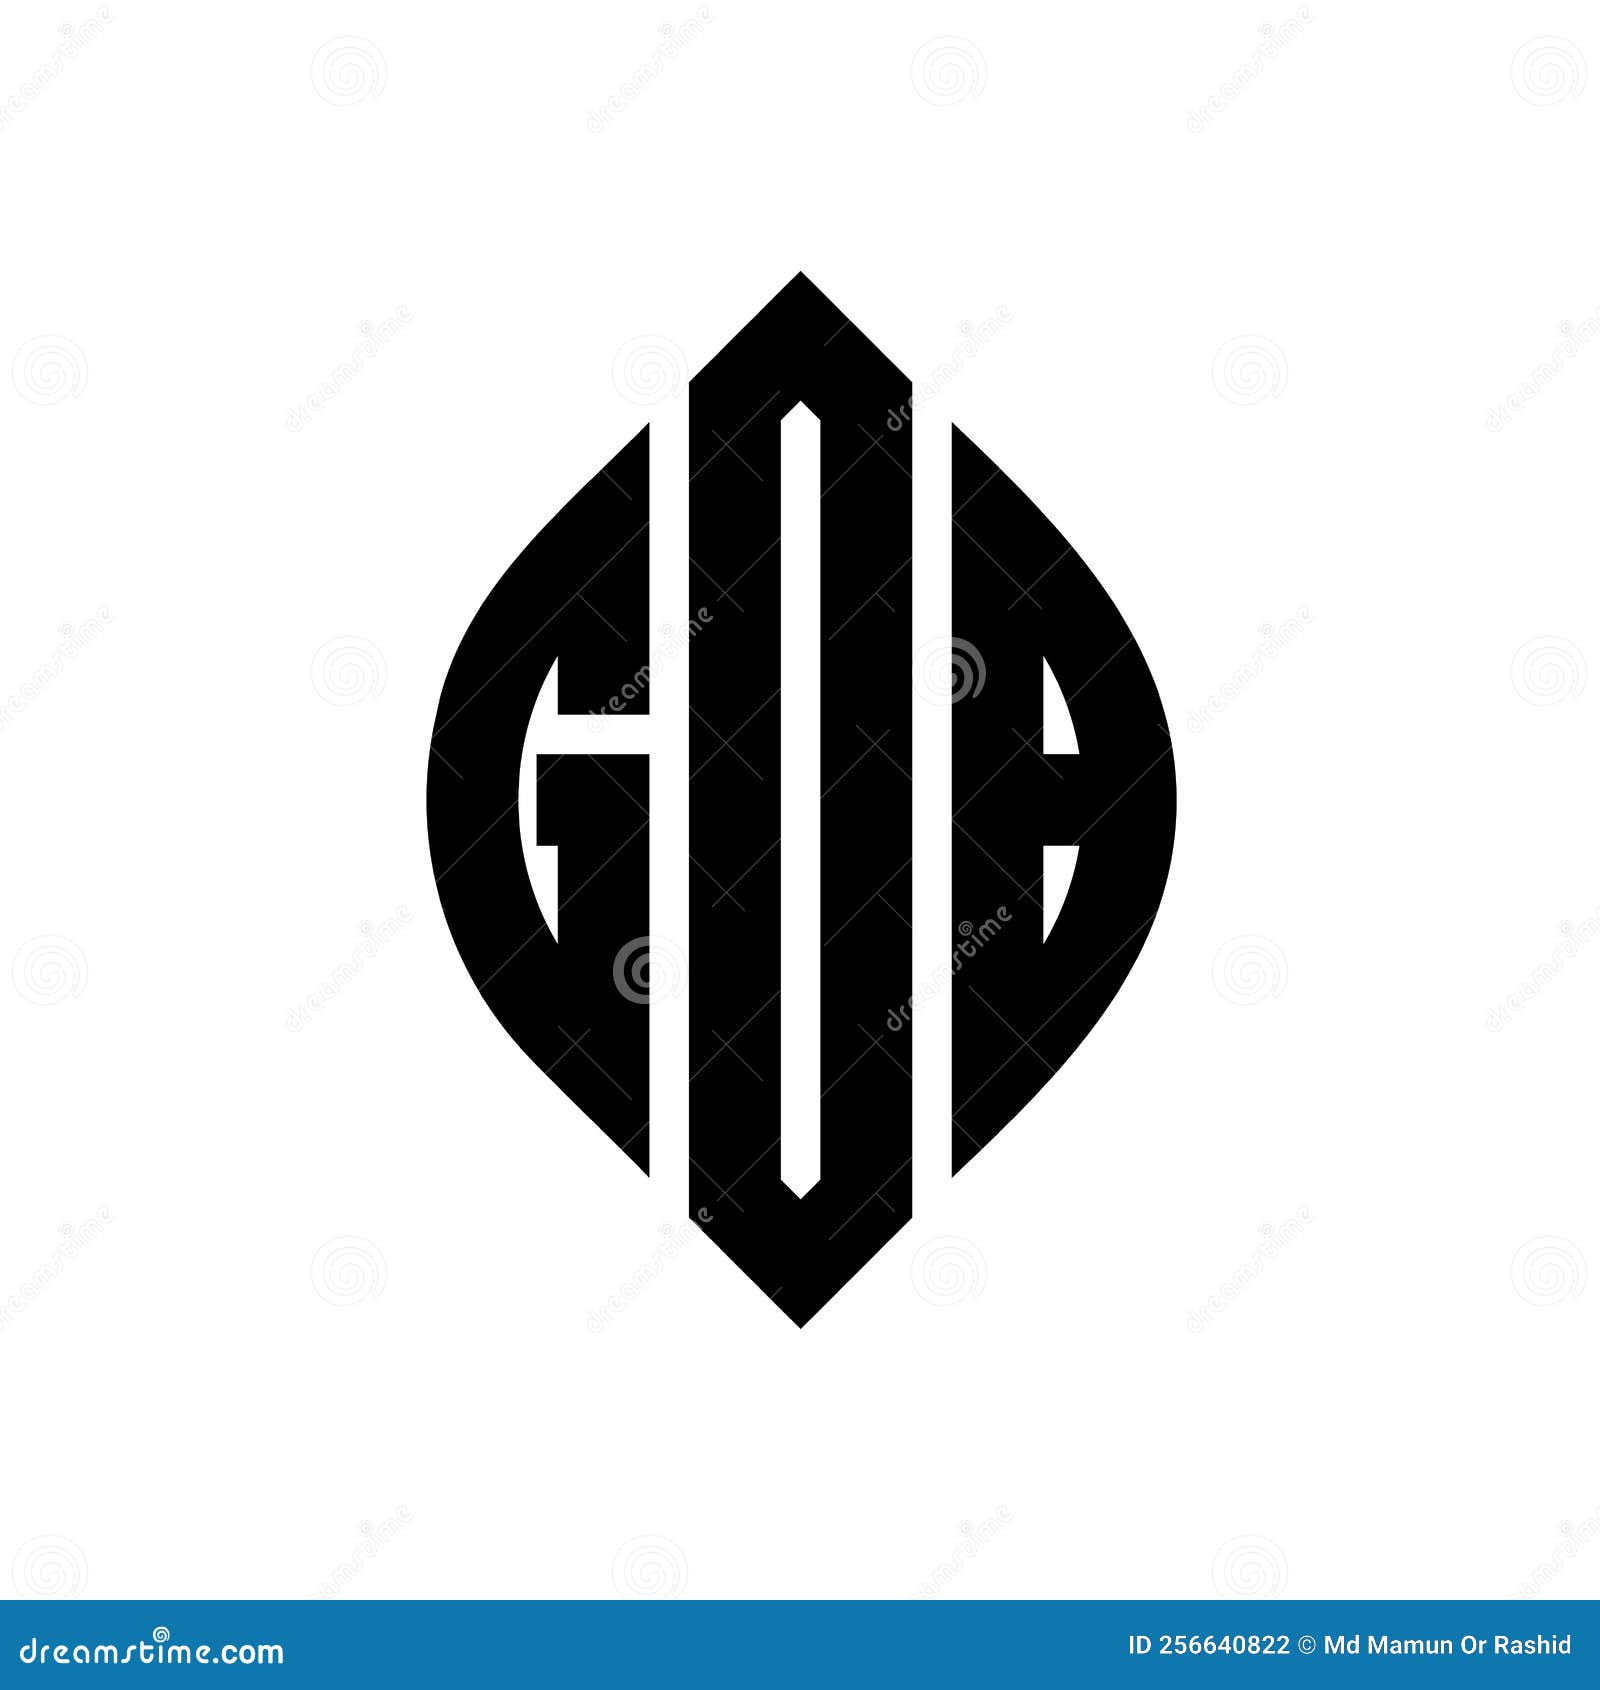 gob circle letter logo  with circle and ellipse . gob ellipse letters with typographic style. the three initials form a